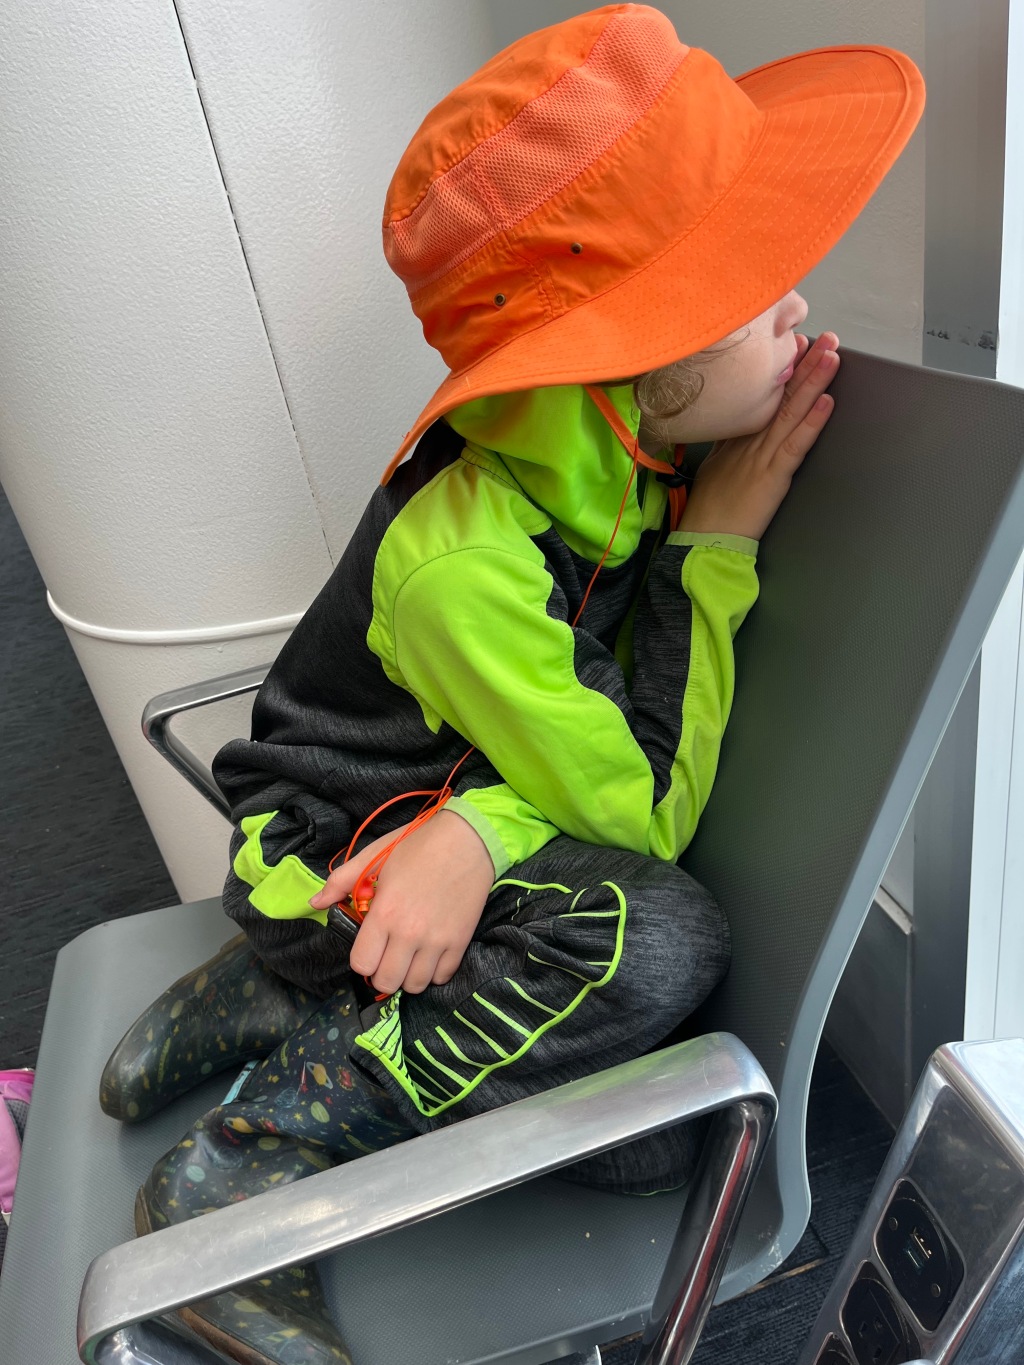 seven year old child waiting in airport chair at gate